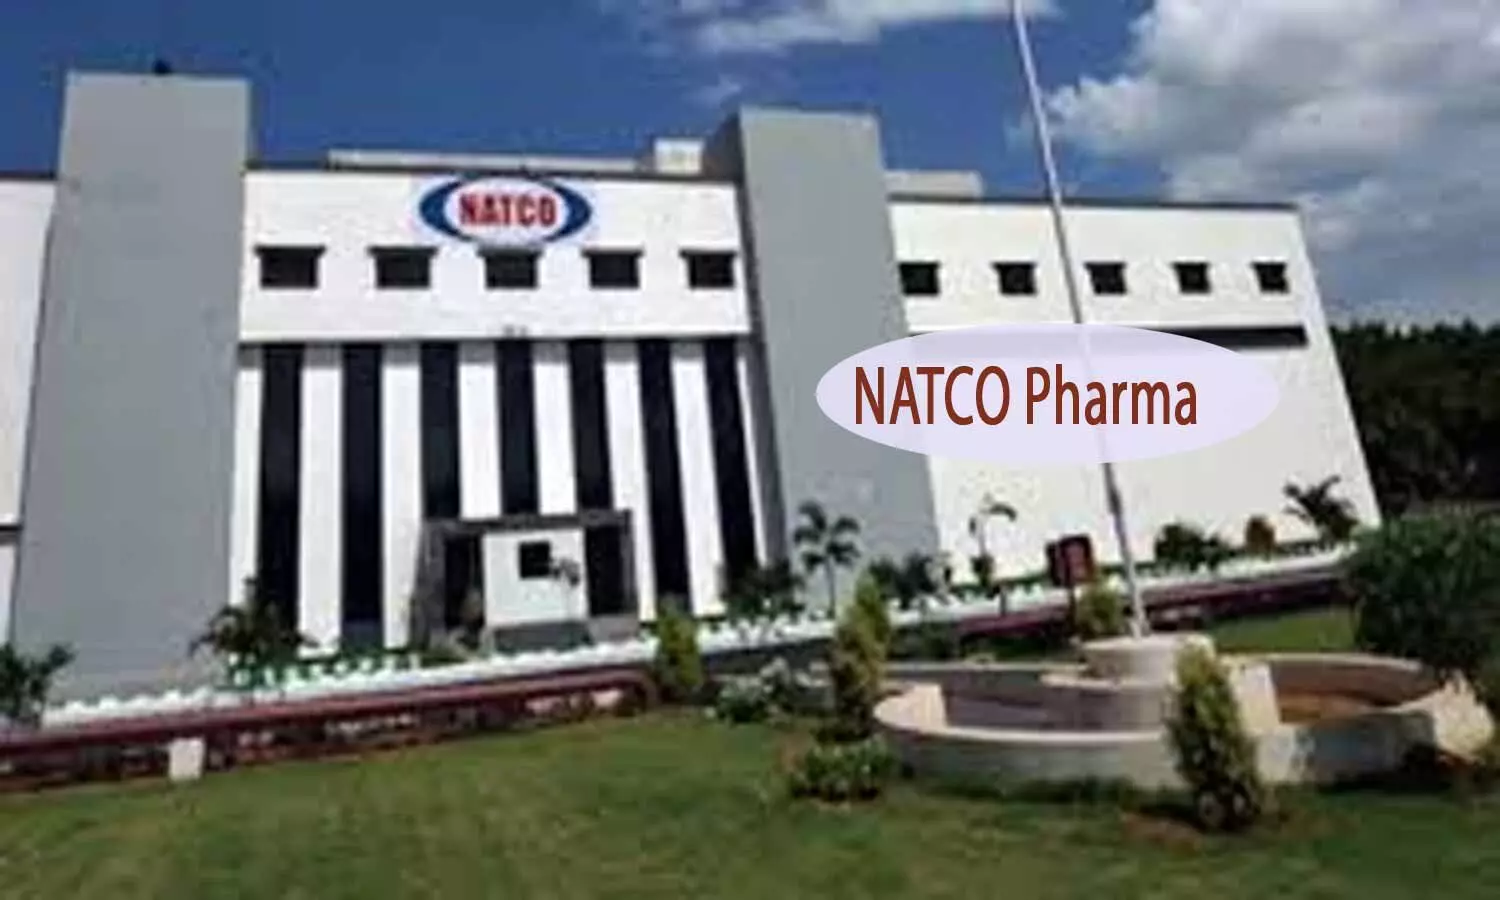 Natco Pharma reports multifold rise in net profit to Rs 320.4 crore in Q1